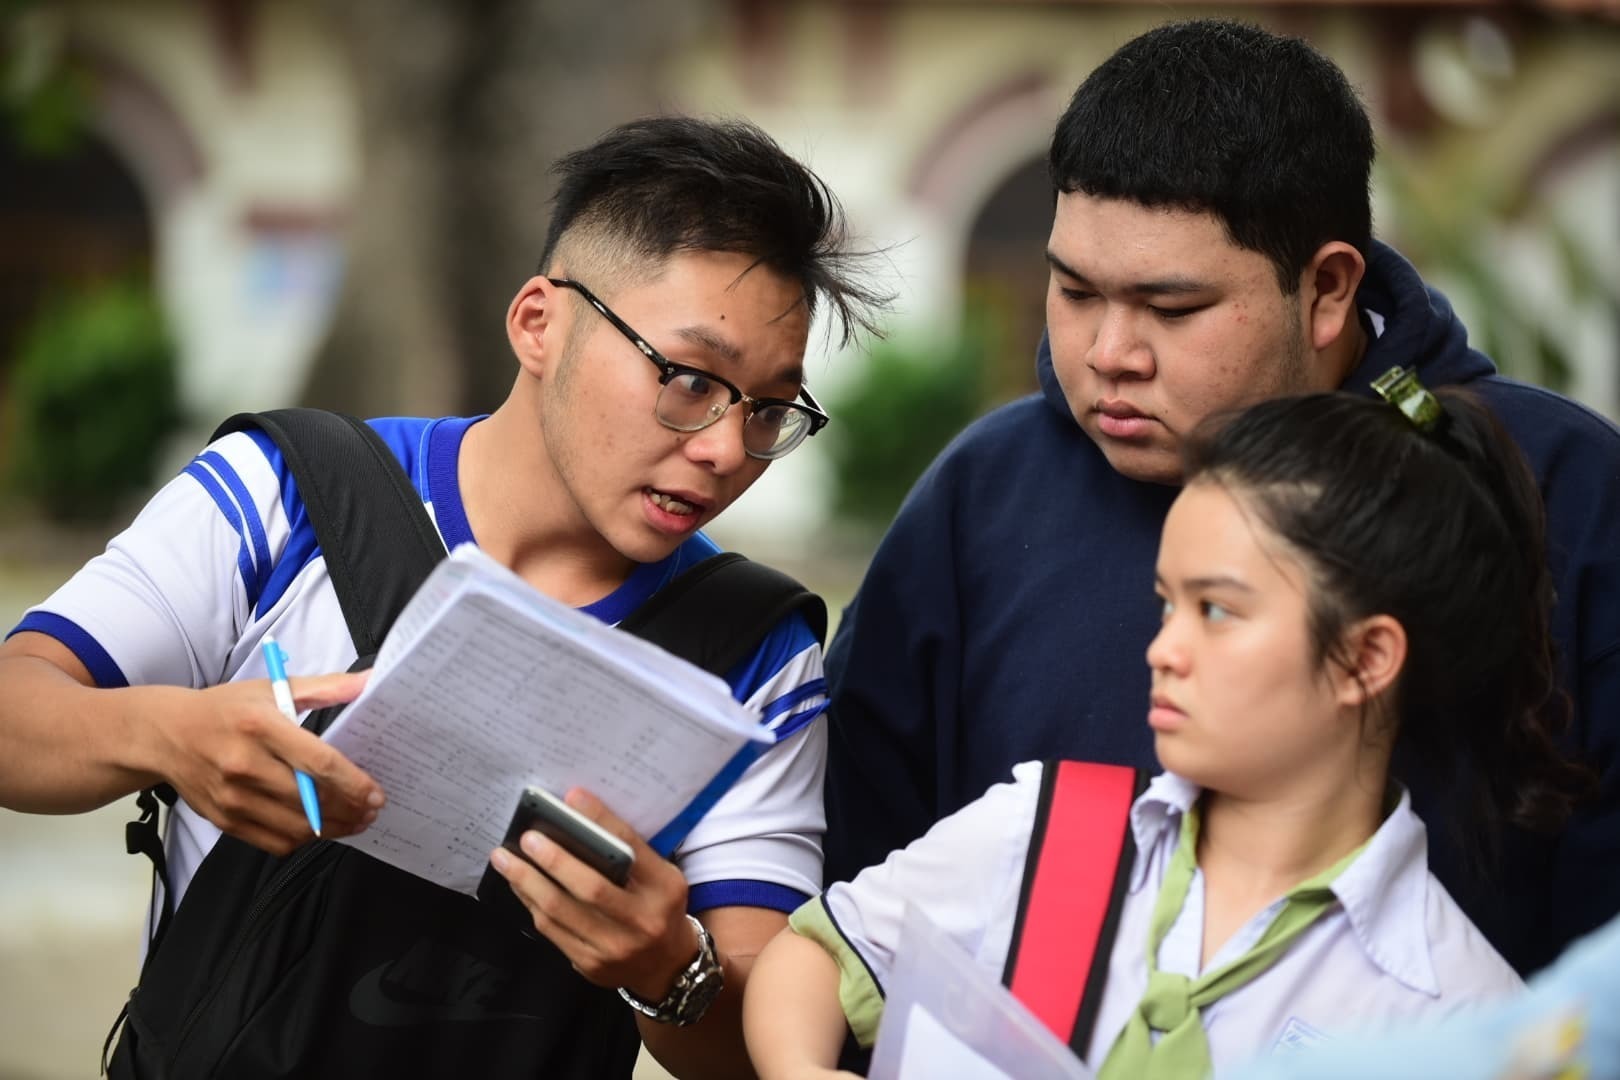 Universities require higher benchmarks for admission